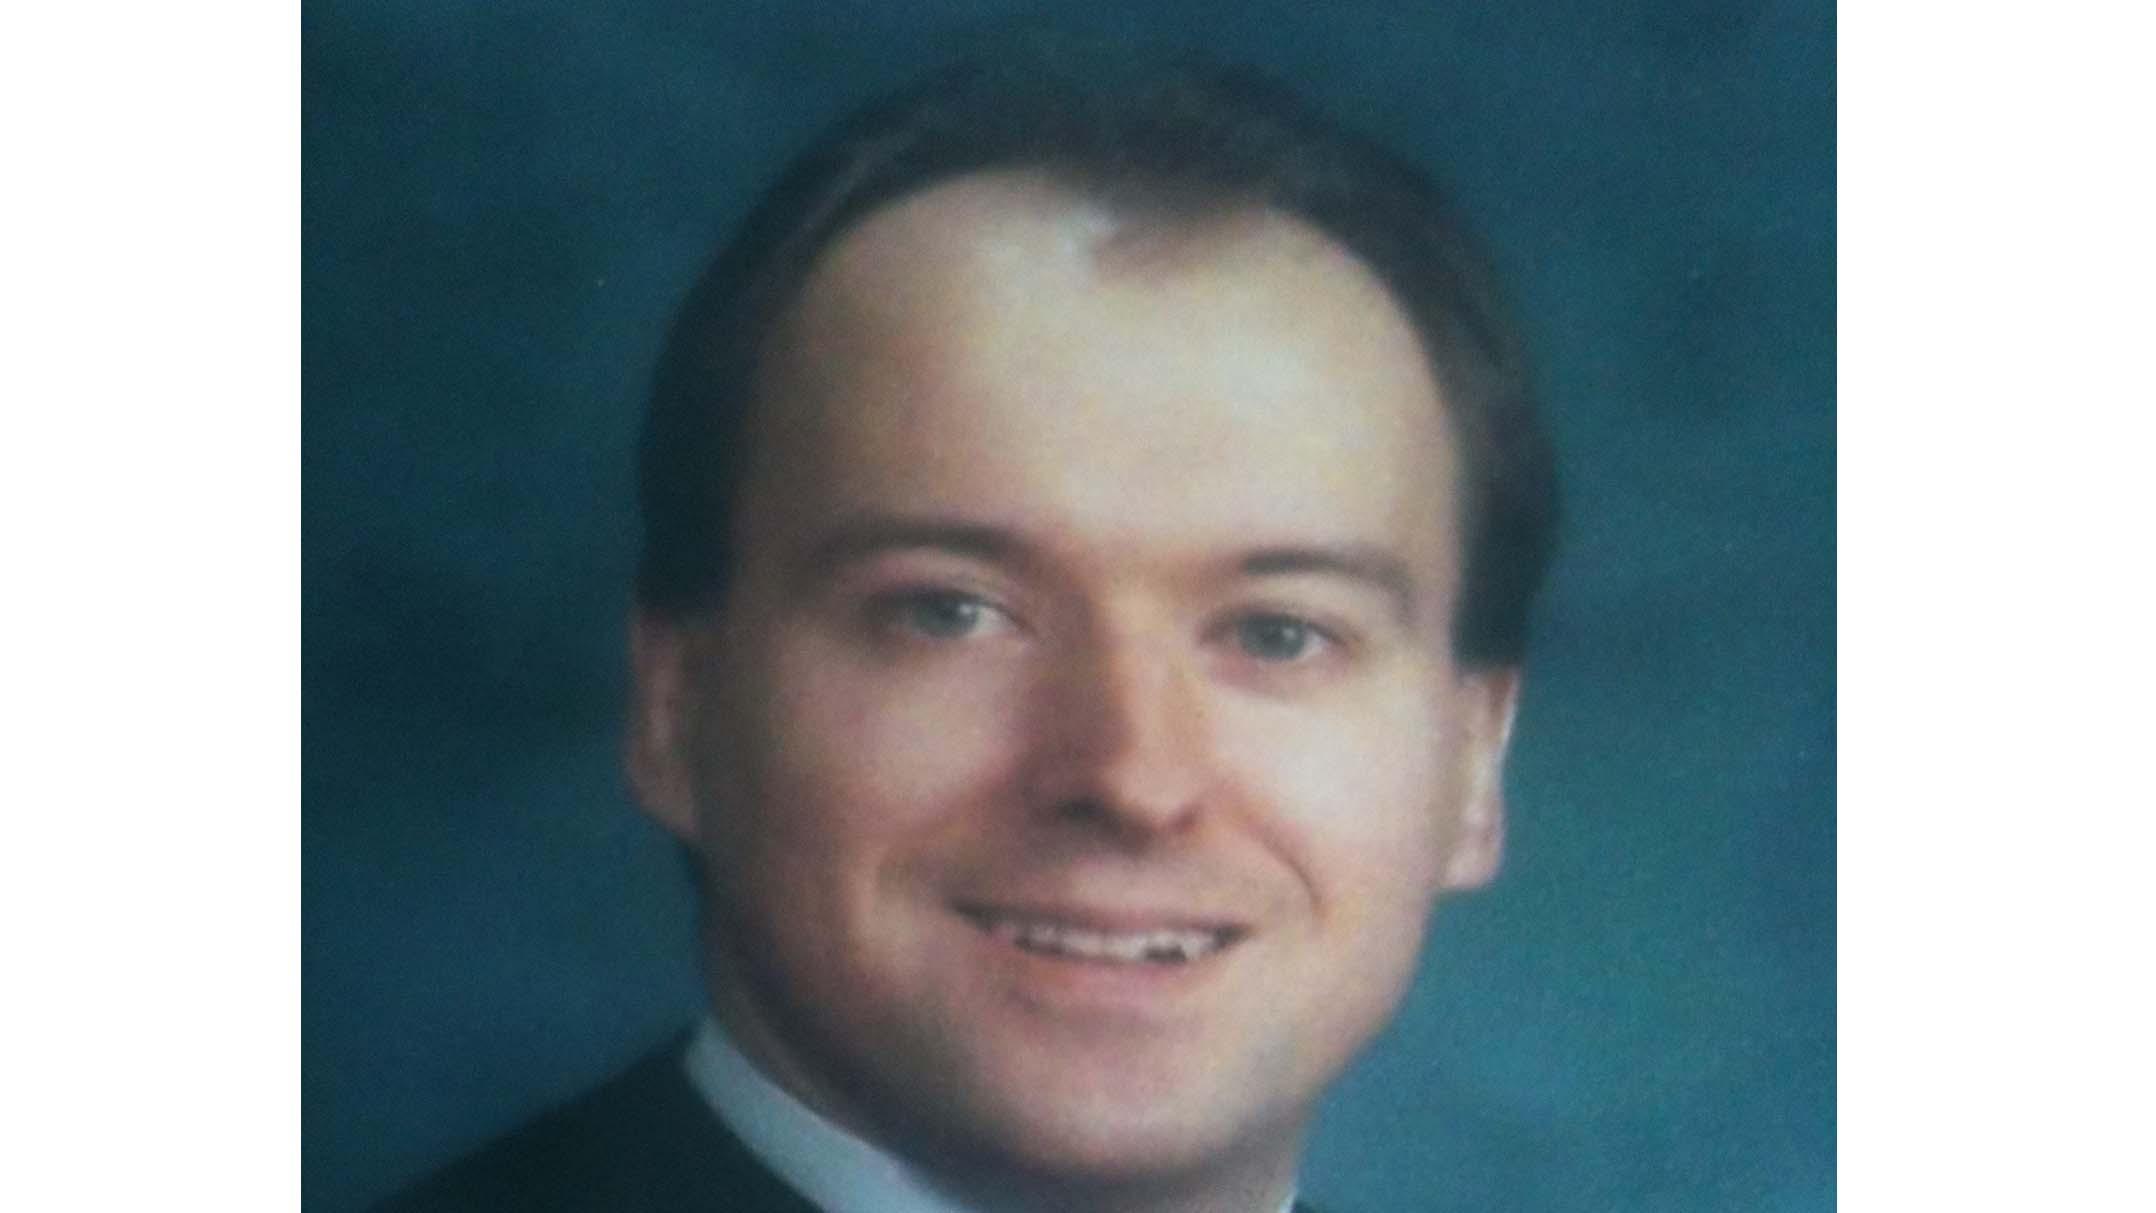 (Photo: Lawyer David Blott taken at the time of his graduation from the University of Alberta Law School in 1998) - 2011_11_17_Martens_Allegationsagainst_ph_Image1